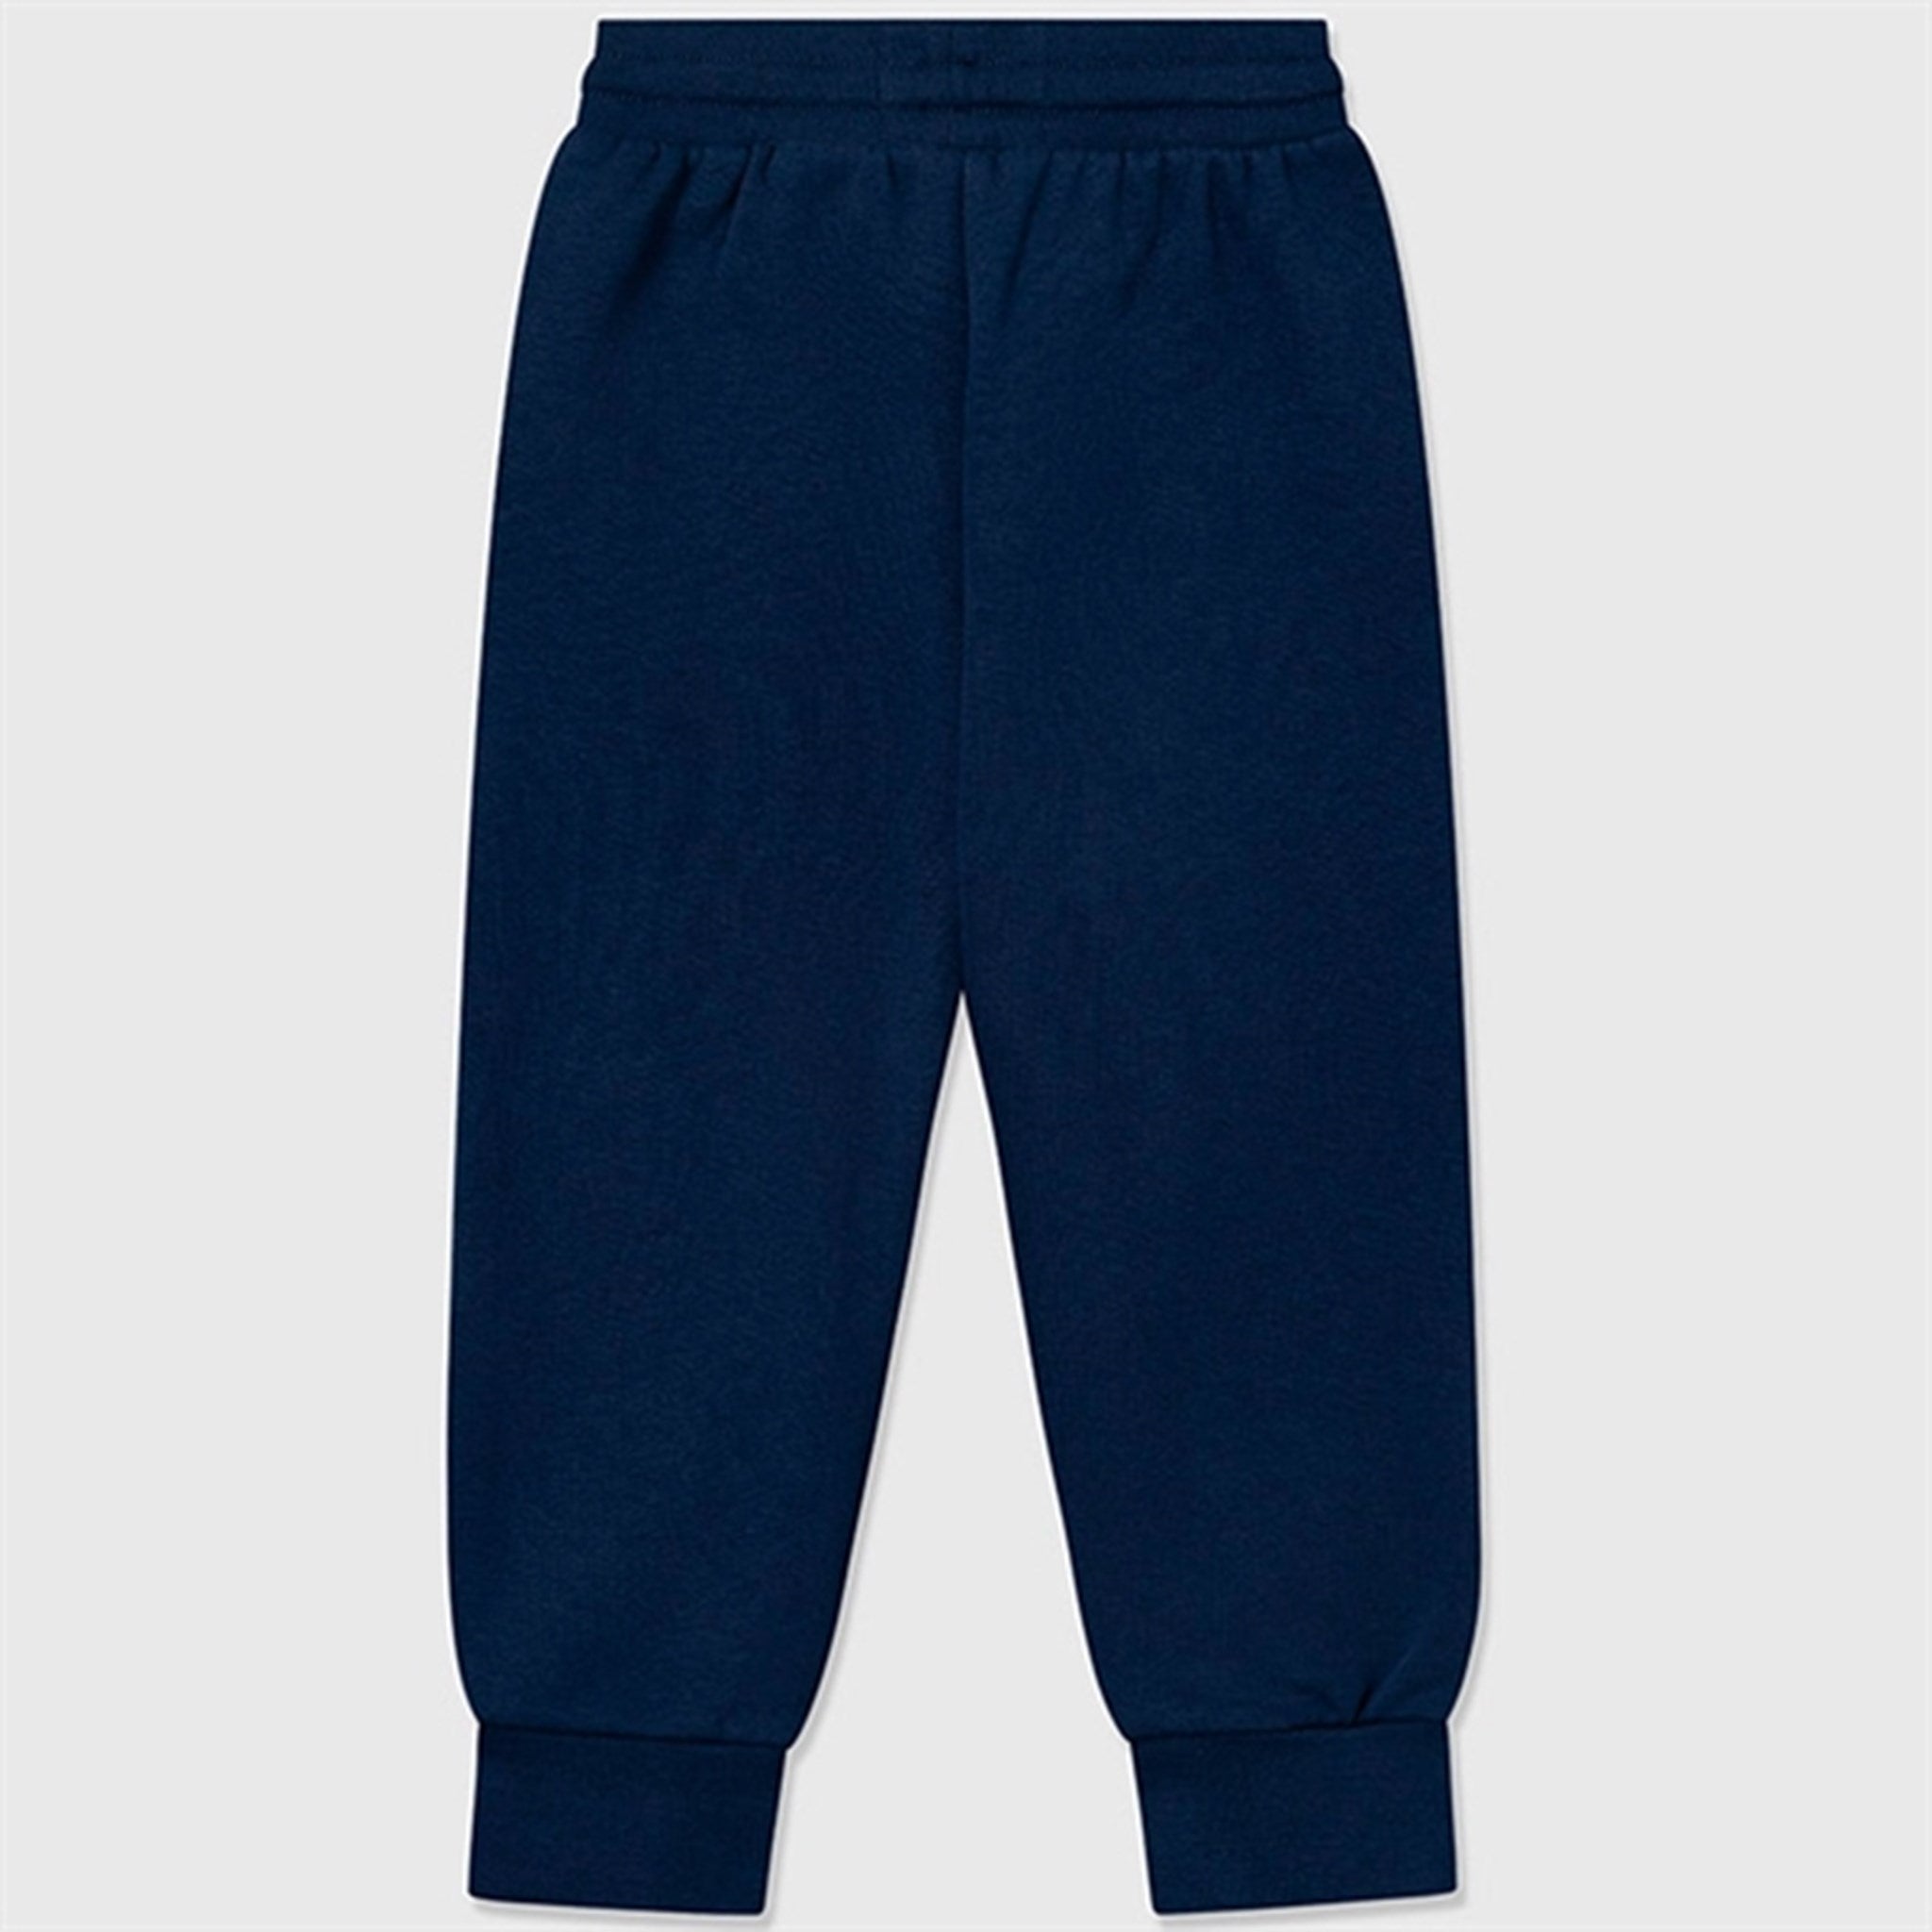 Wood Wood Navy Ran Doggy Patch Pants 2